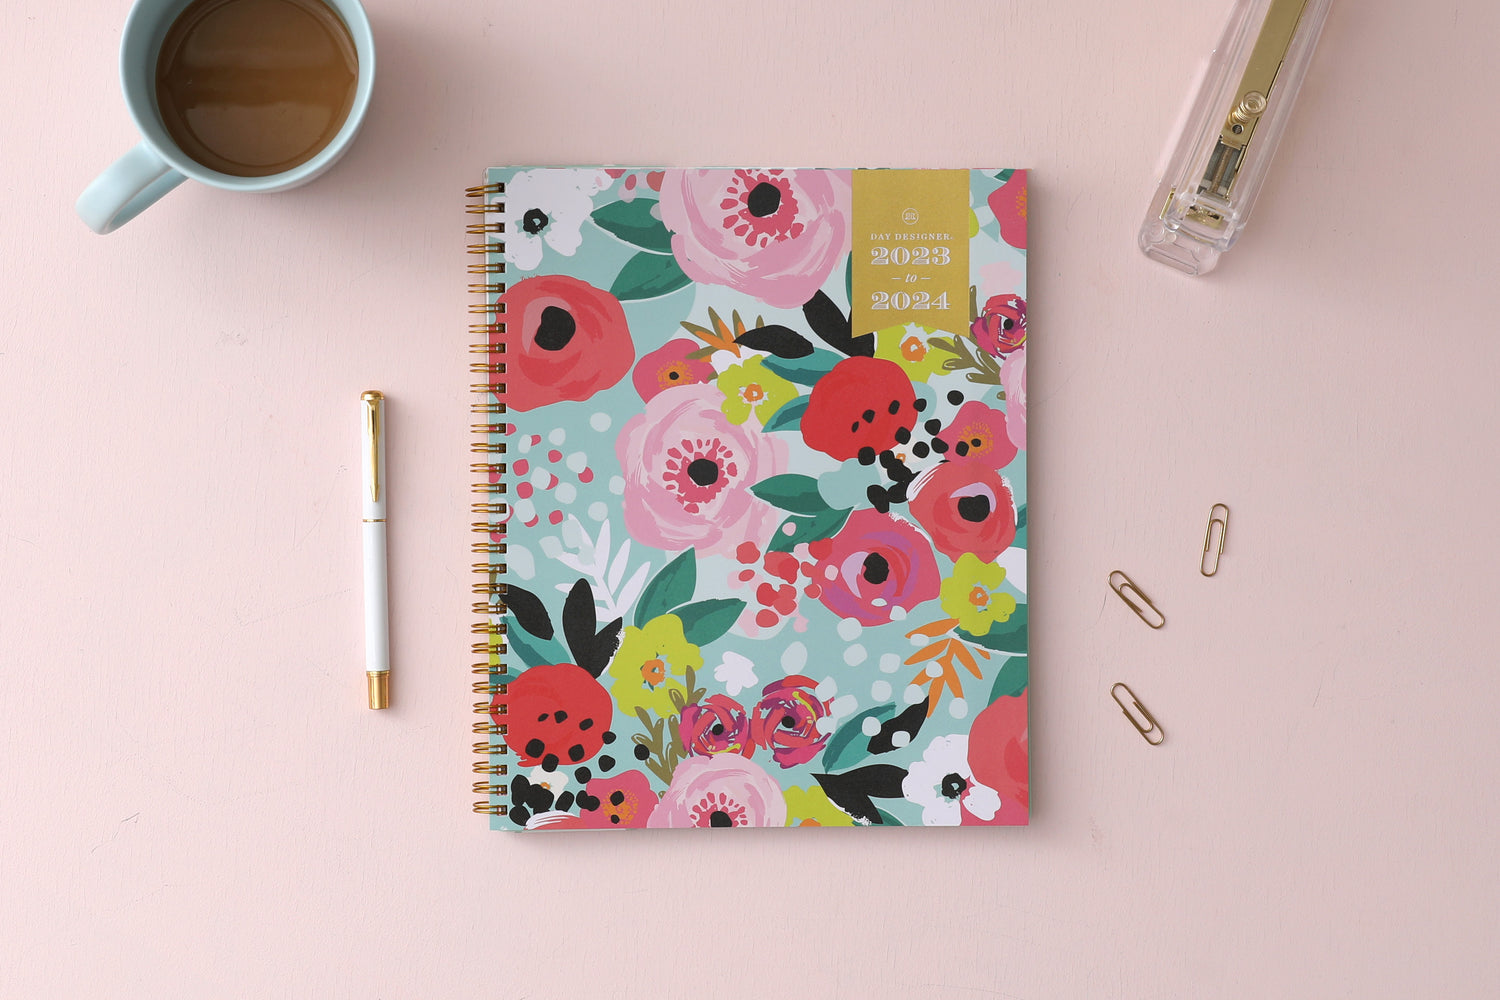 July 2023 - June 2024 weekly monthly planner and organizer by Day Designer featuring a fun, floral front cover in 8.5x11 size